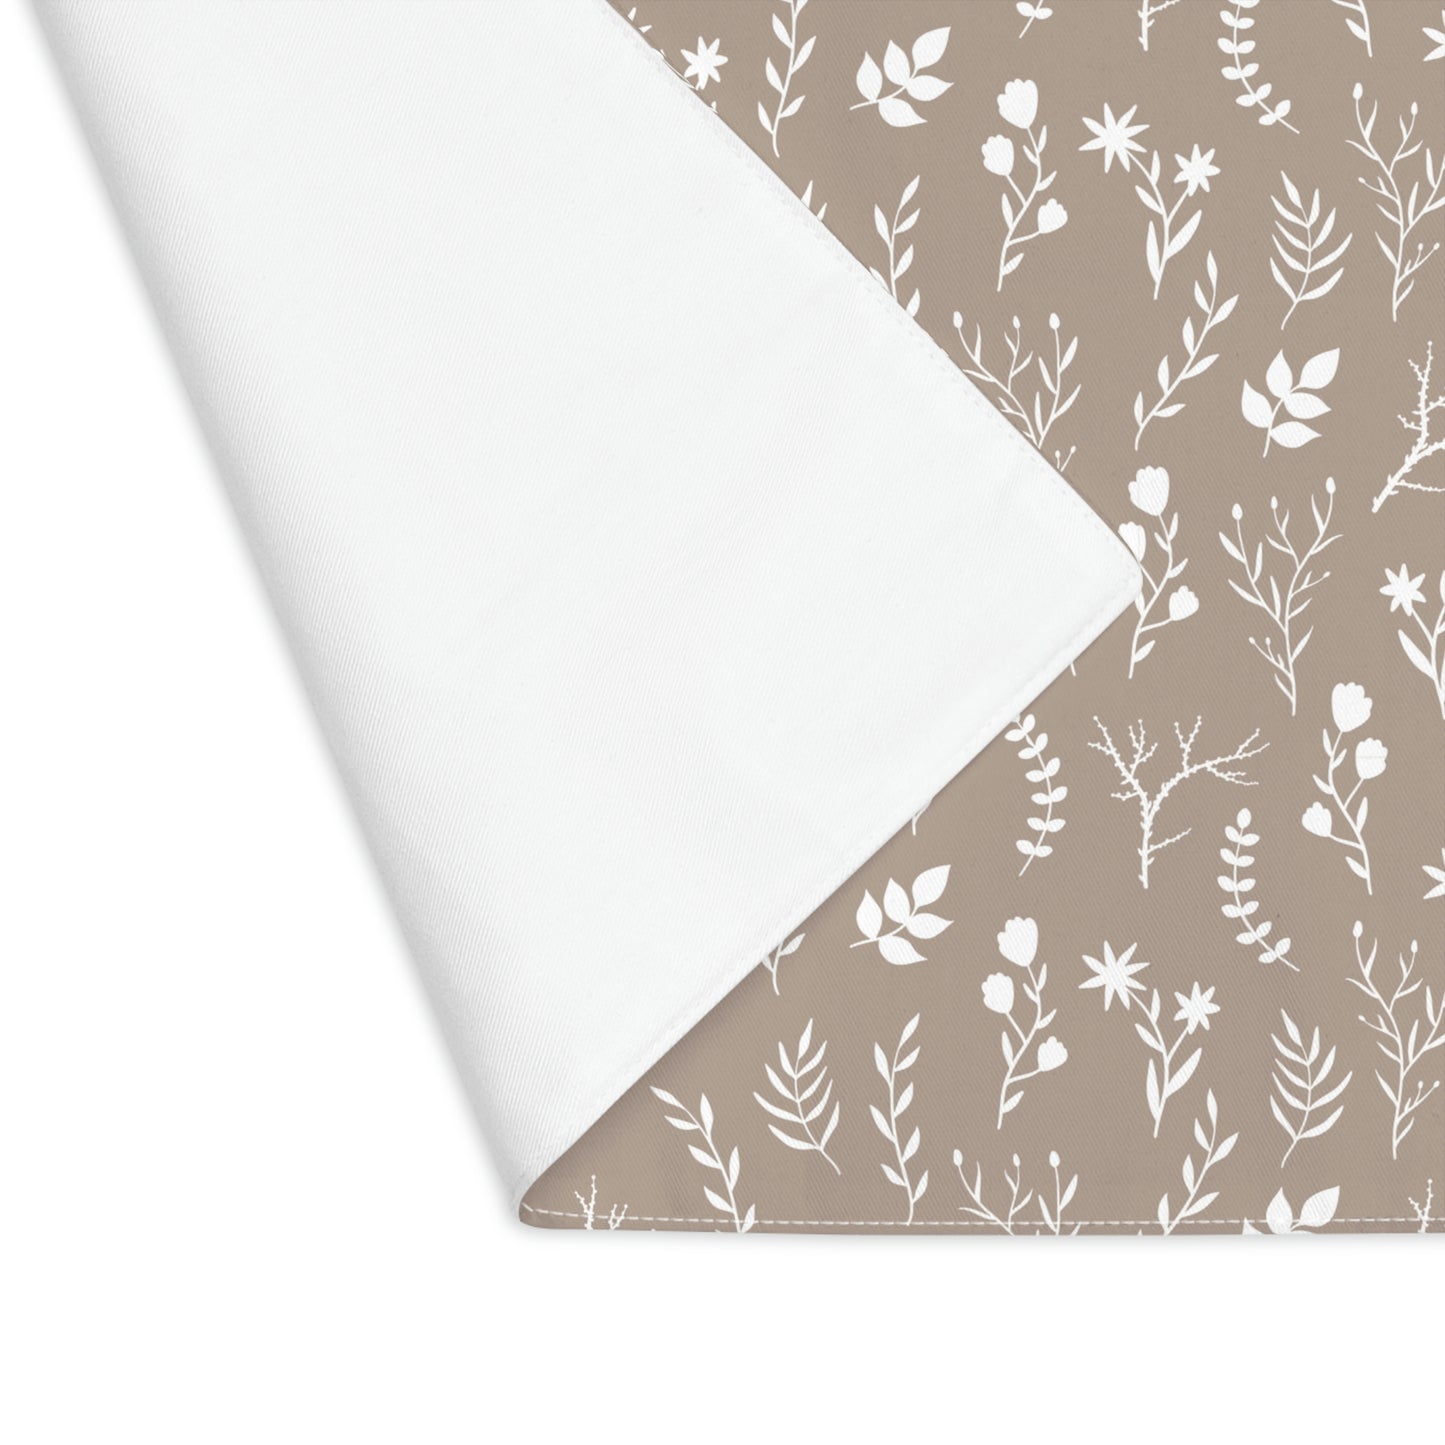 White and Taupe Floral Print Placemat